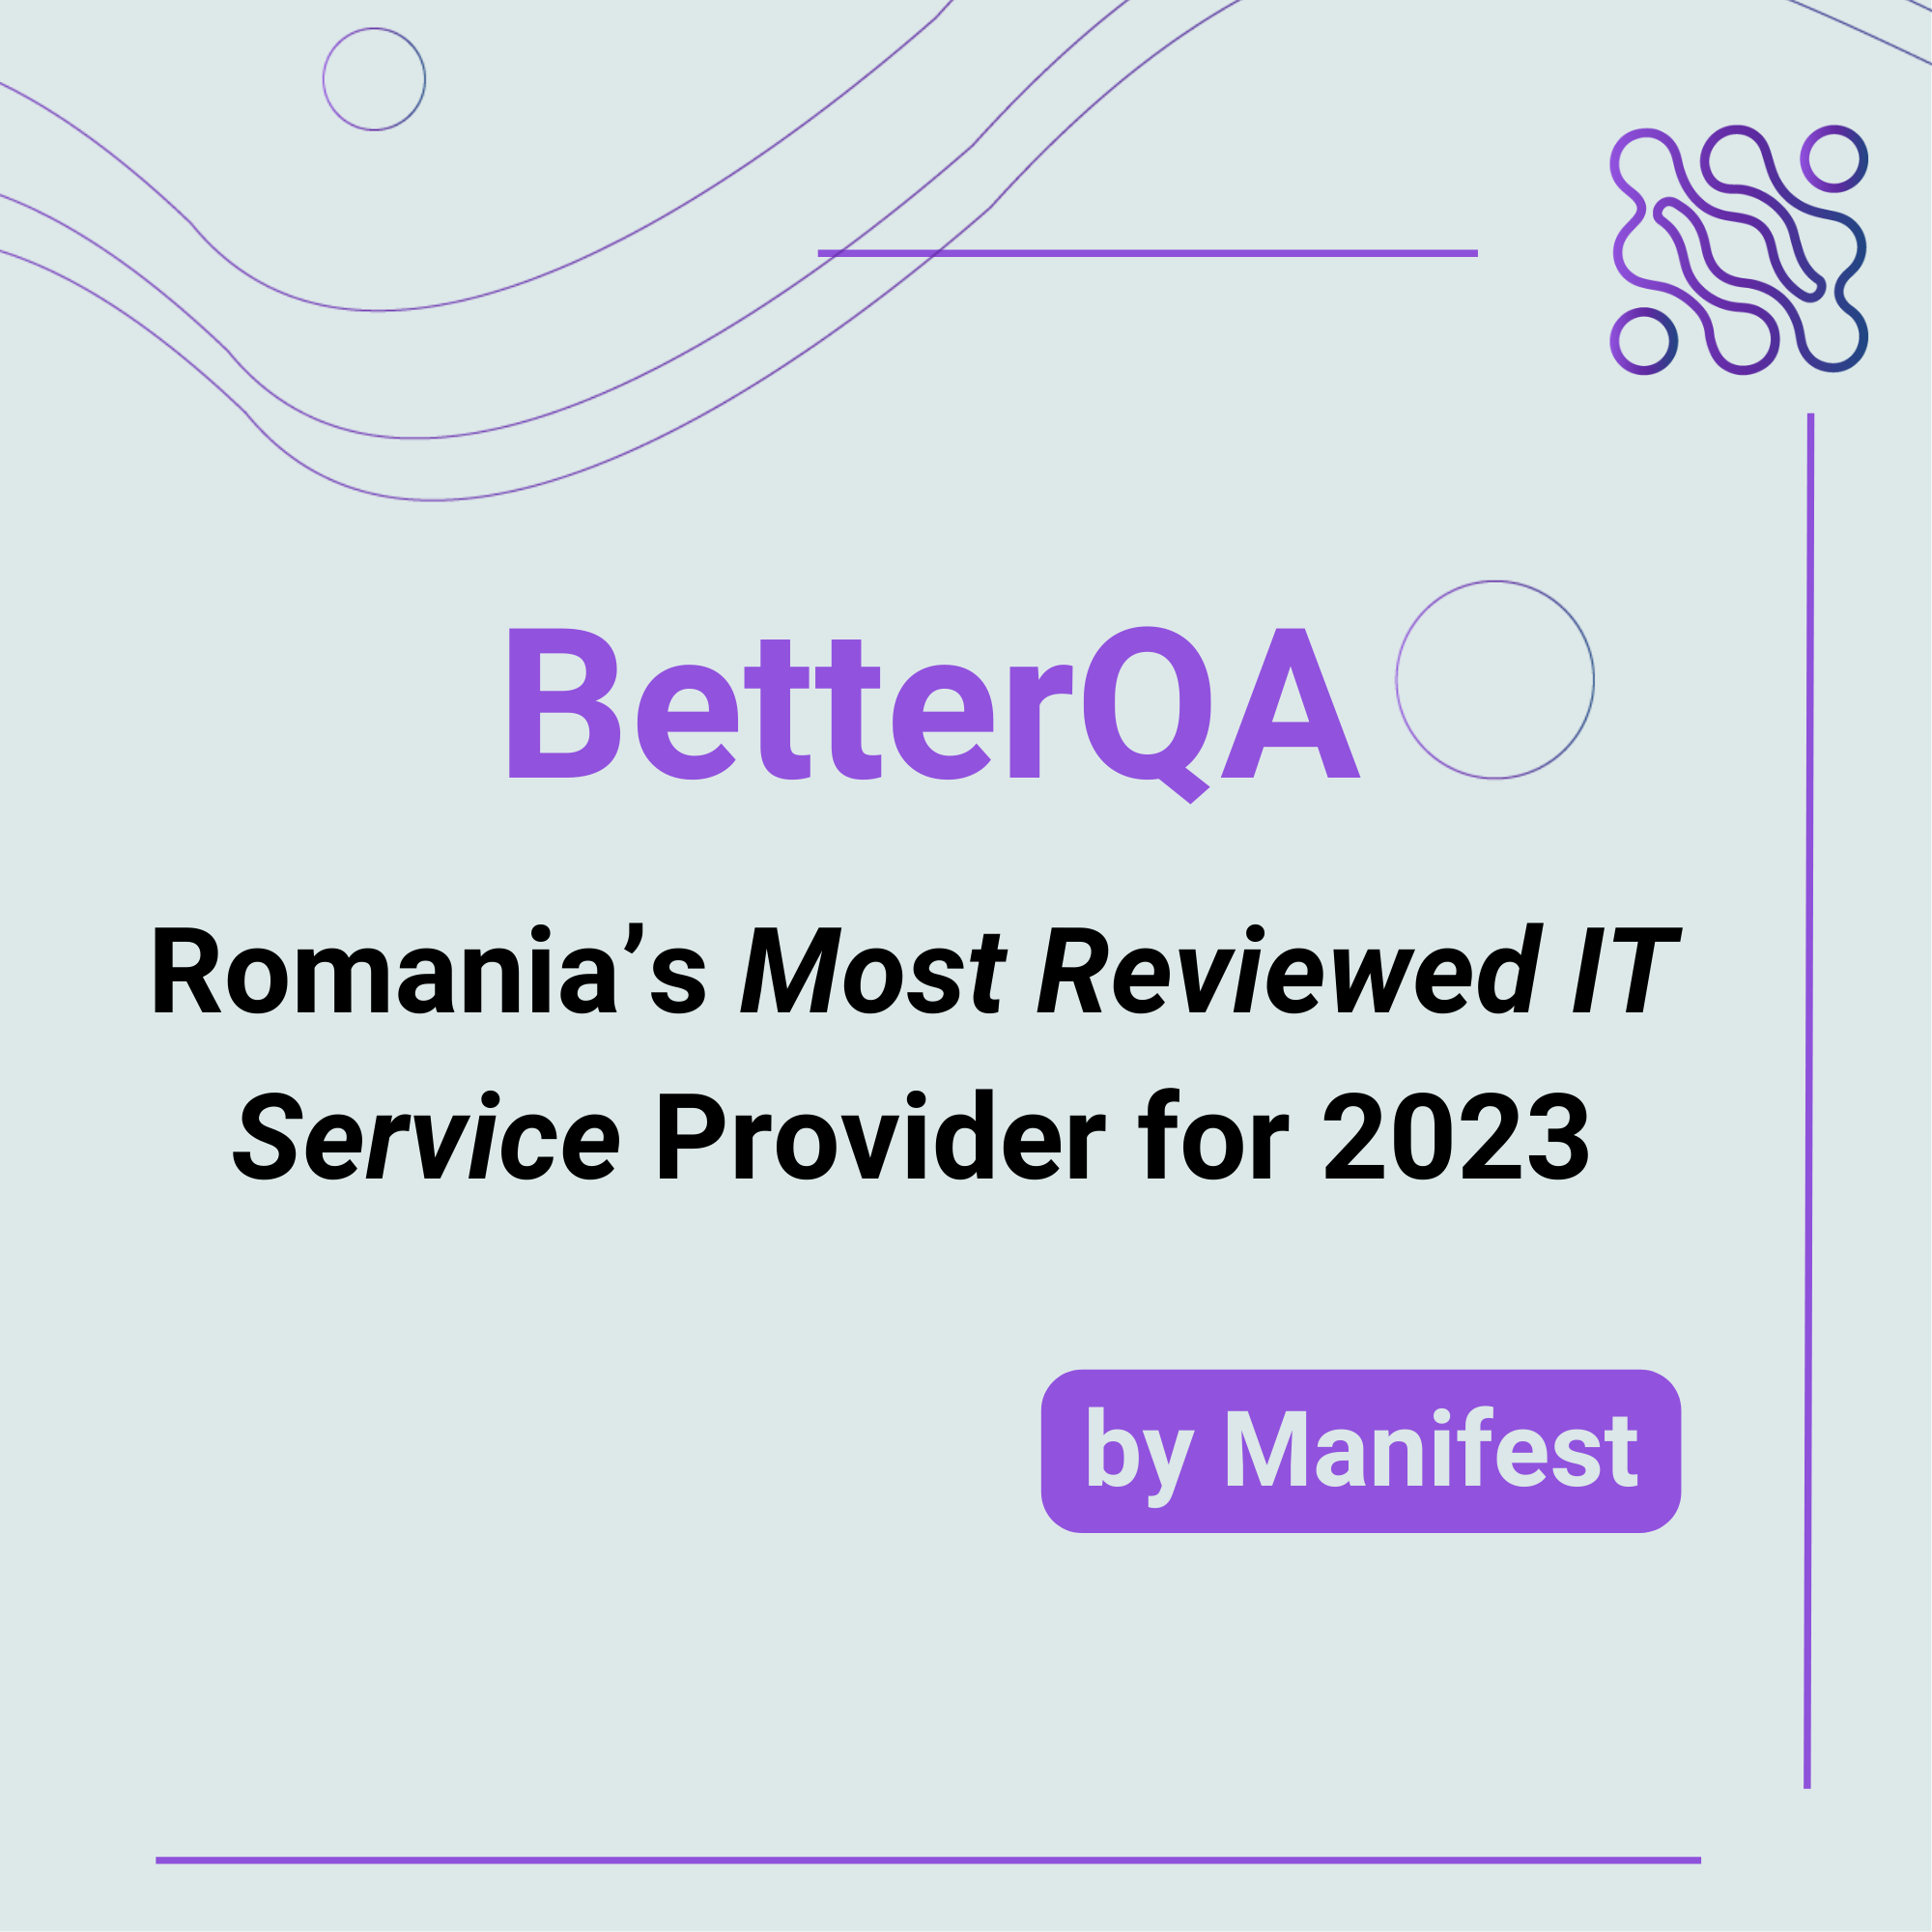 The Manifest Names BetterQA as Romania’s Most Reviewed IT Service Provider for 2023